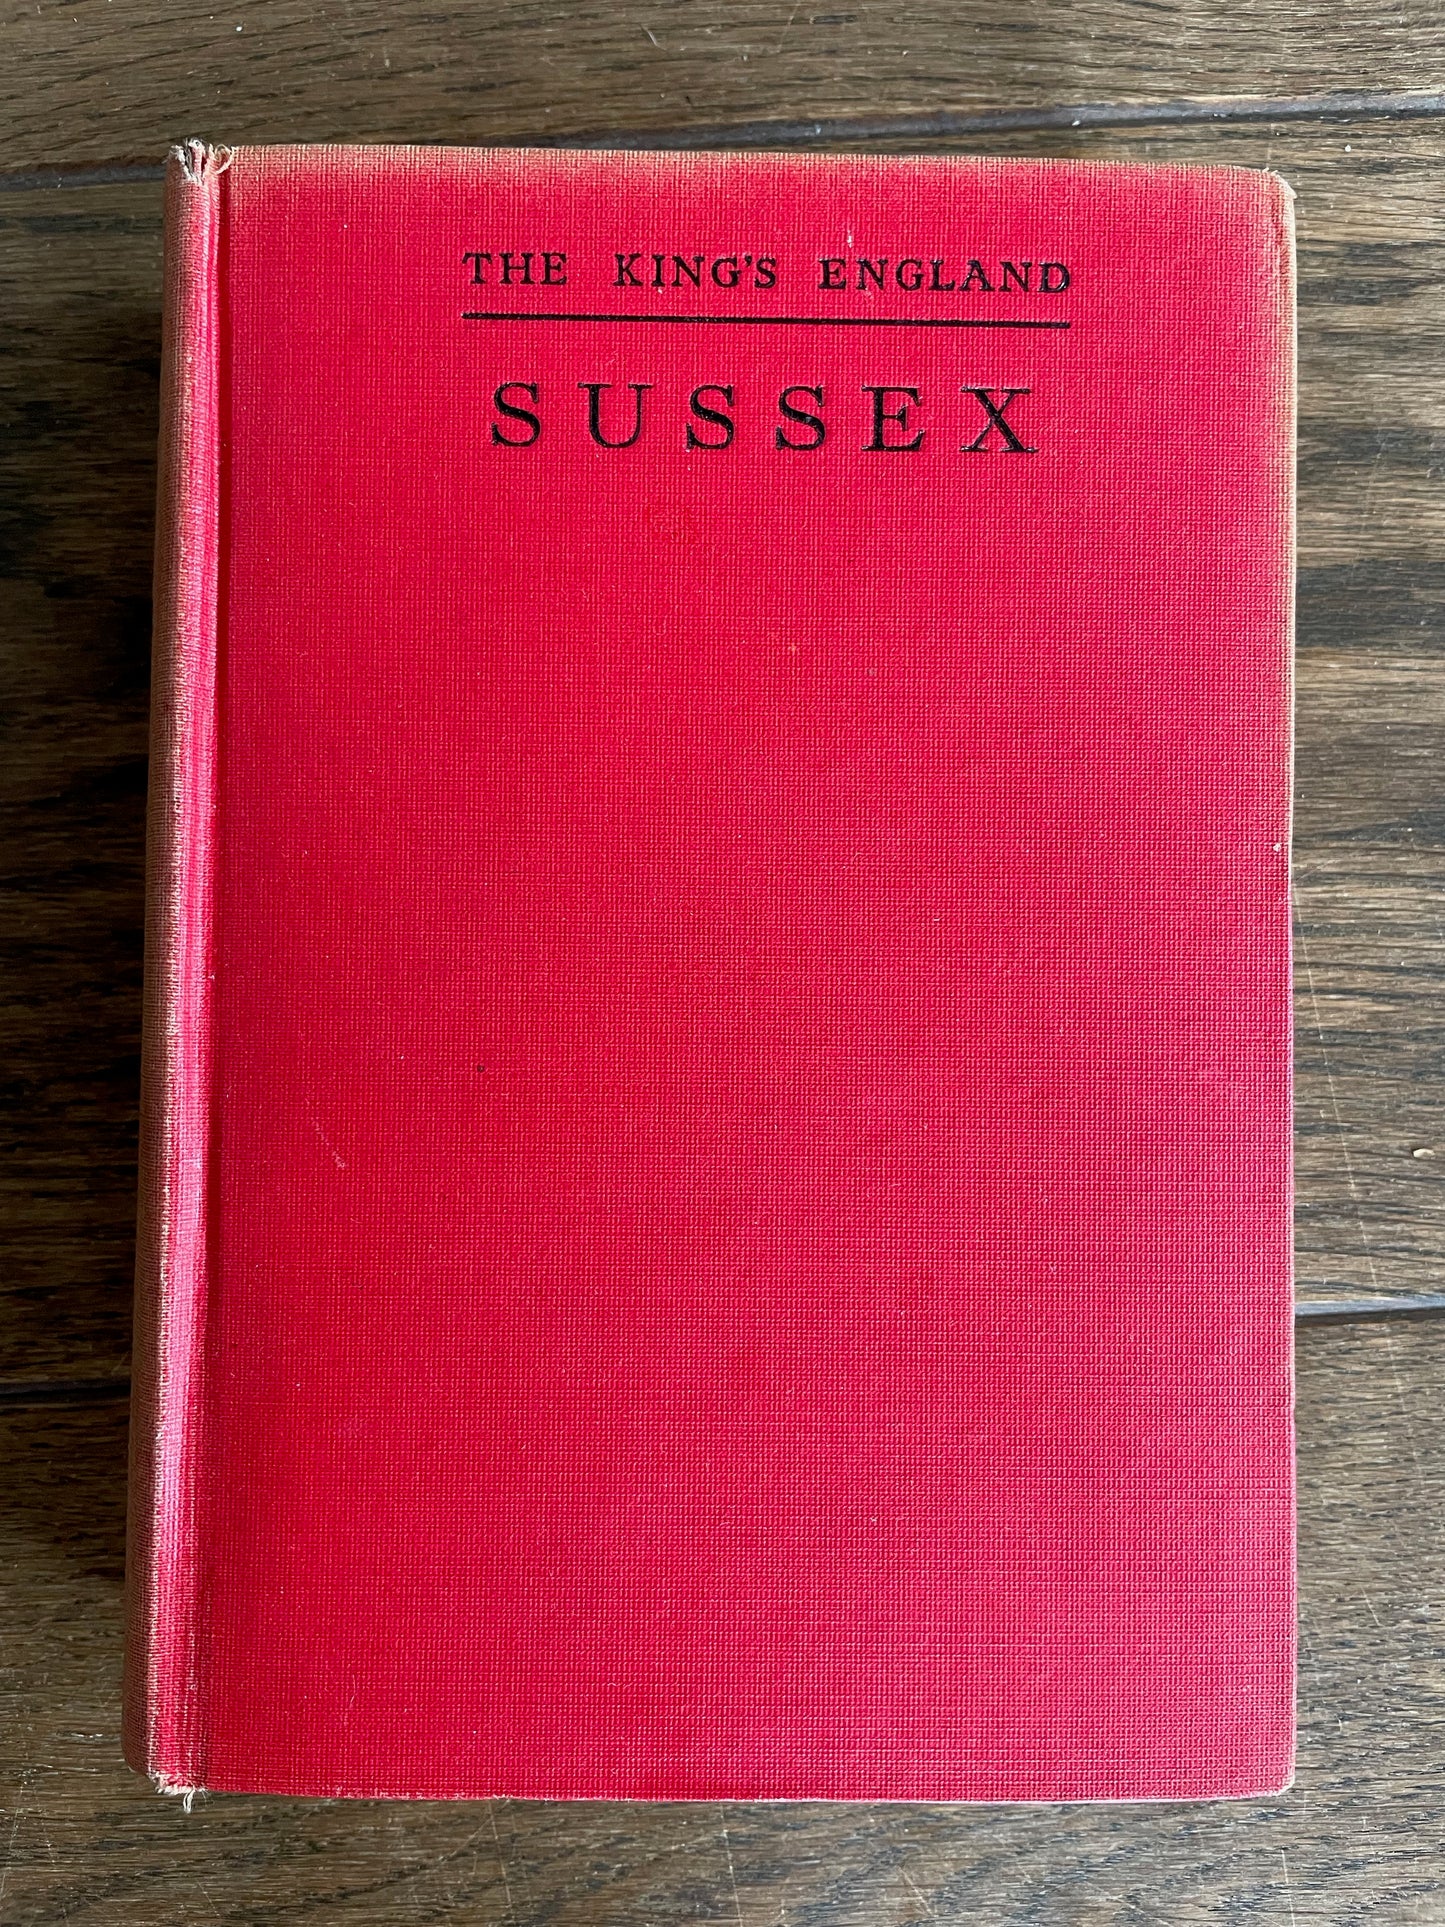 The King's England - Sussex - Arthur Mee